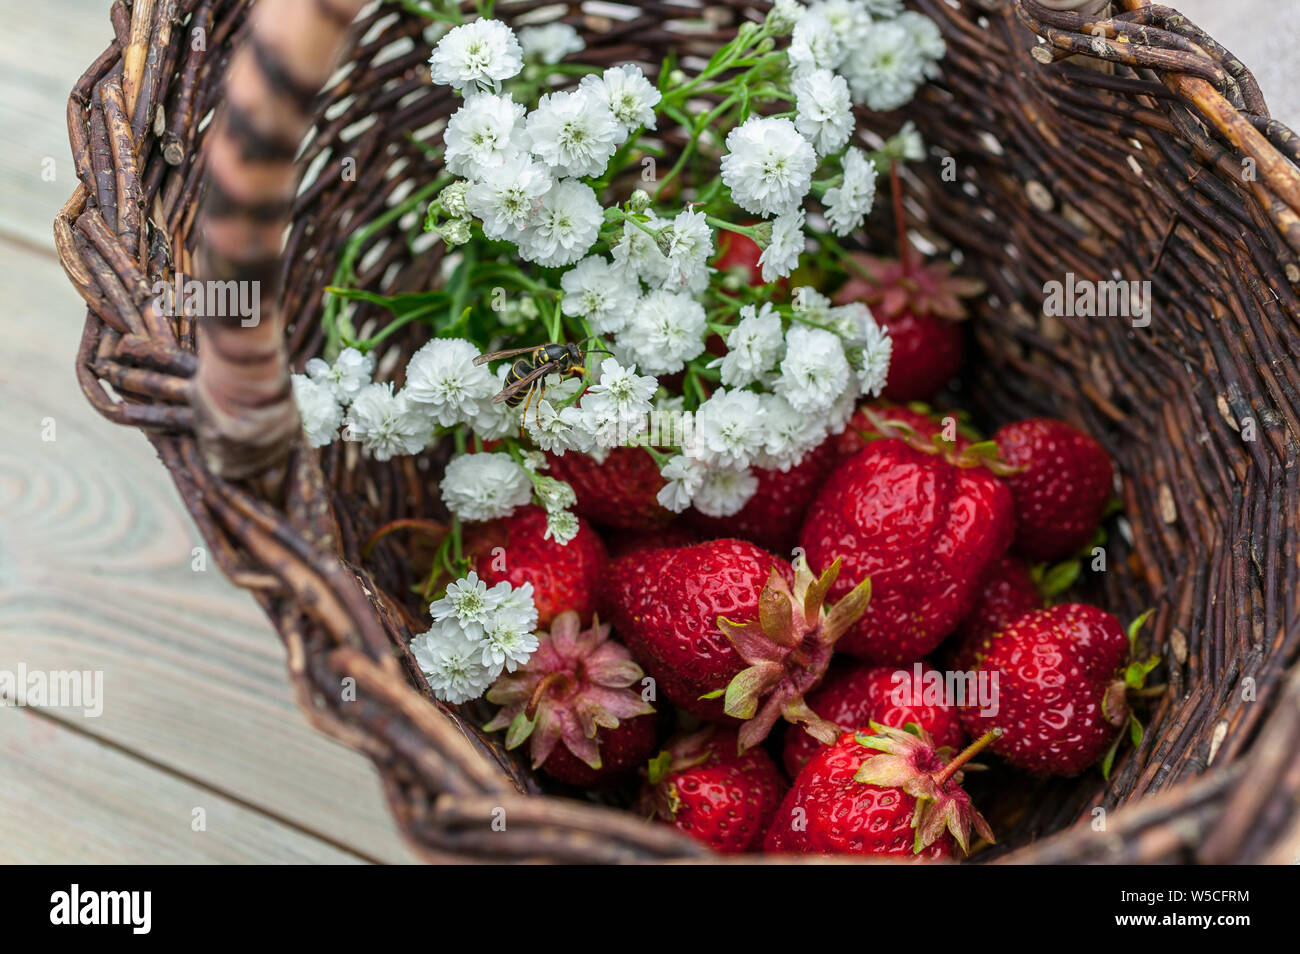 Close-Up strawberries in a basket. Summer food composition on a wooden table. Stock Photo